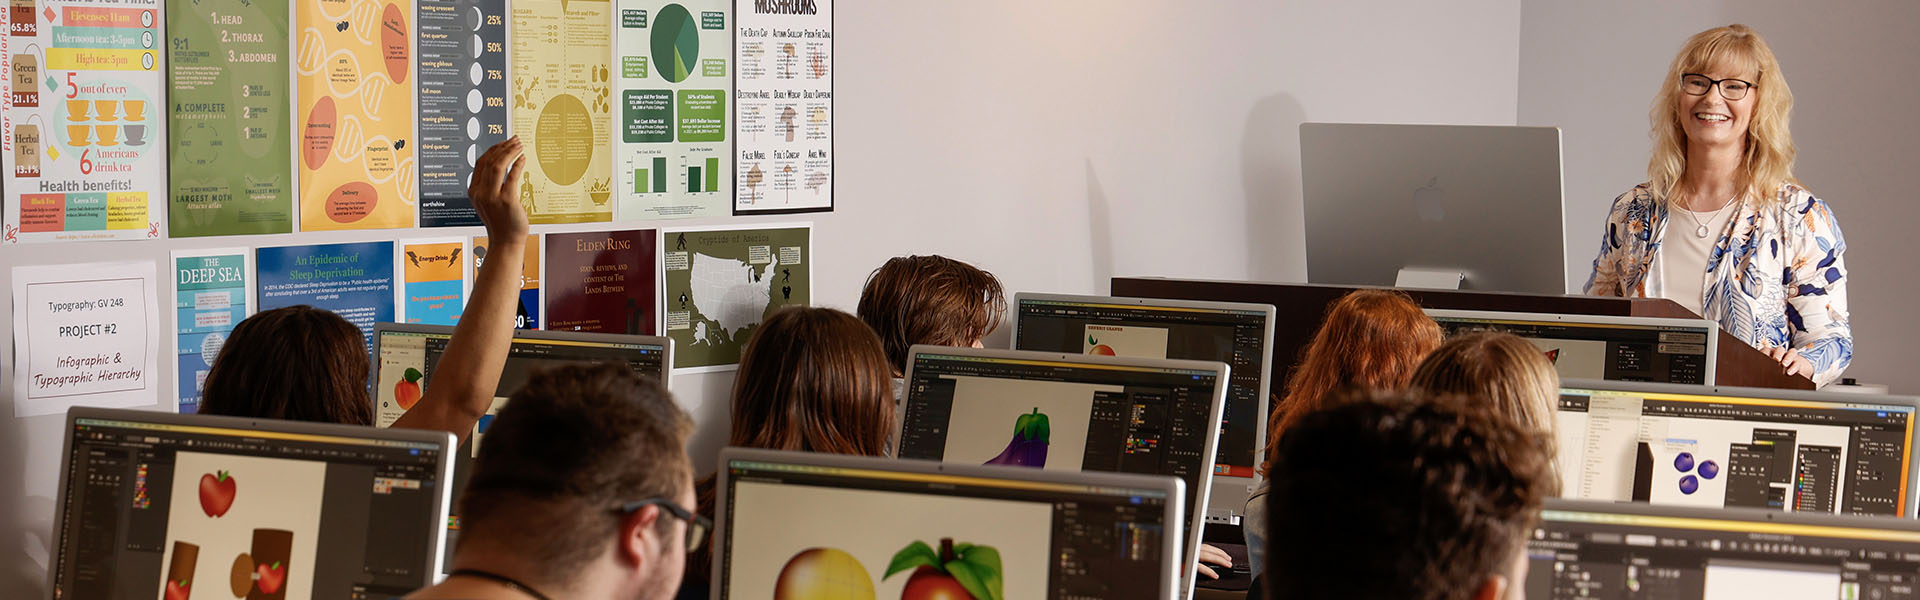 Graphic Visual Design students attend class at the New England School of Communications